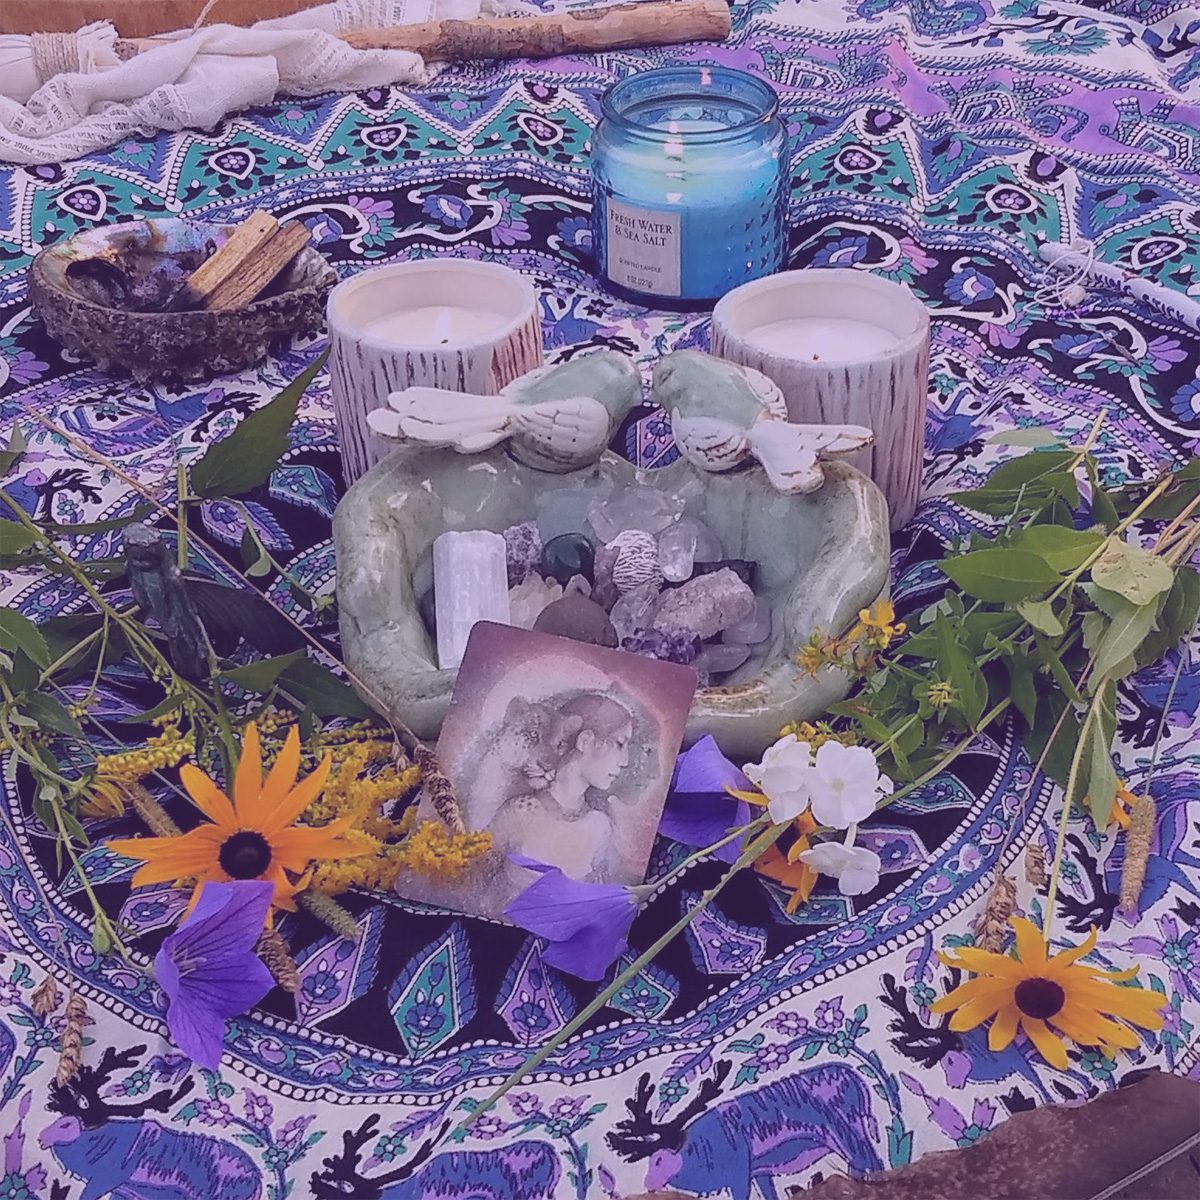 Ritual alter with purple flowers and white candles